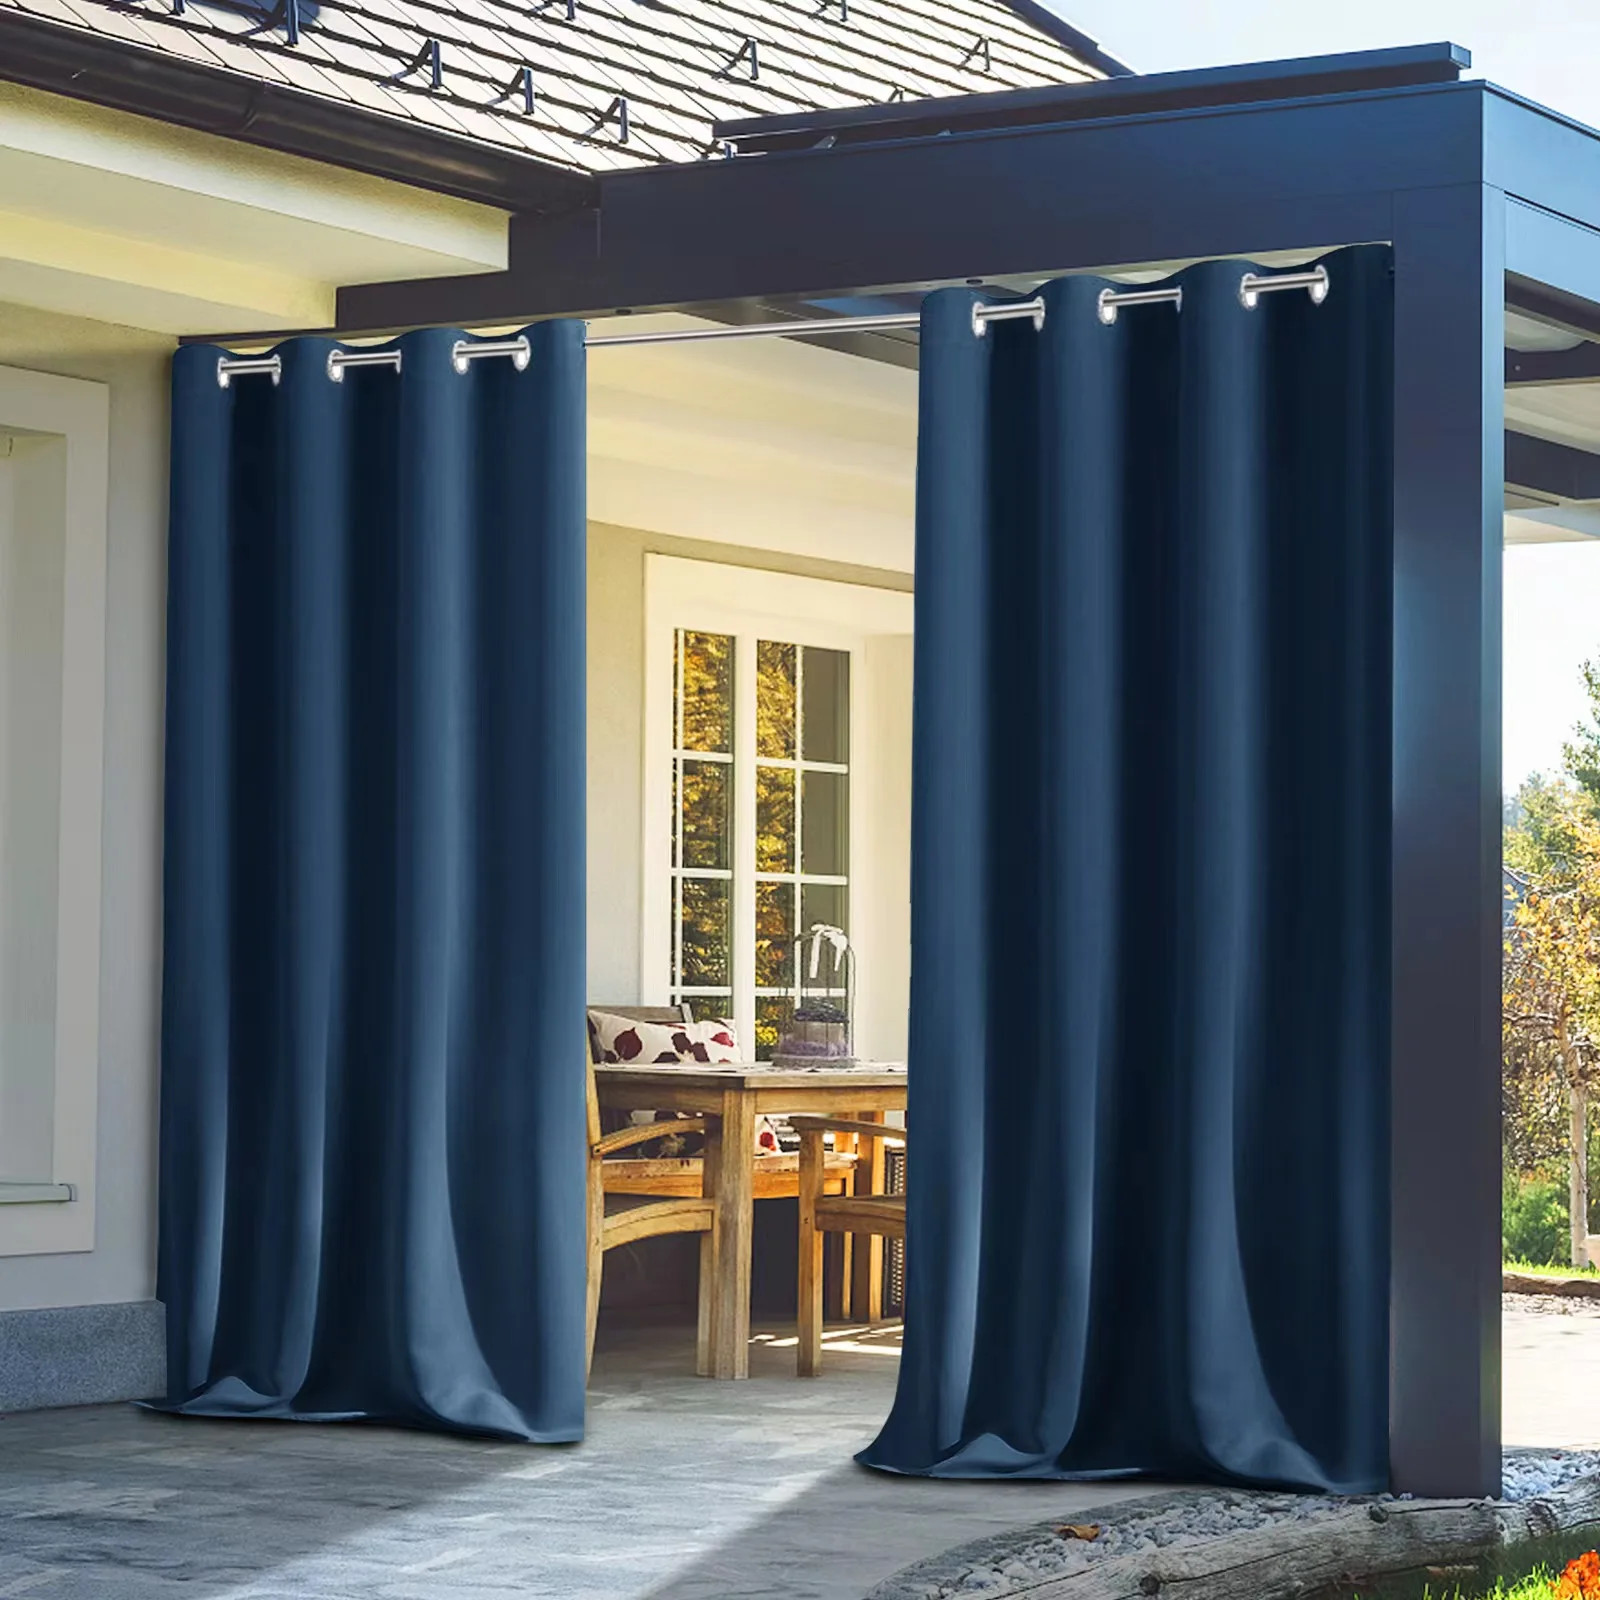 

Outdoor Waterproof Pergola Curtain for Patio Grommet Top Blackout Exterior Garden Curtains Drapes for Window Porch Gazebo 1 Pc